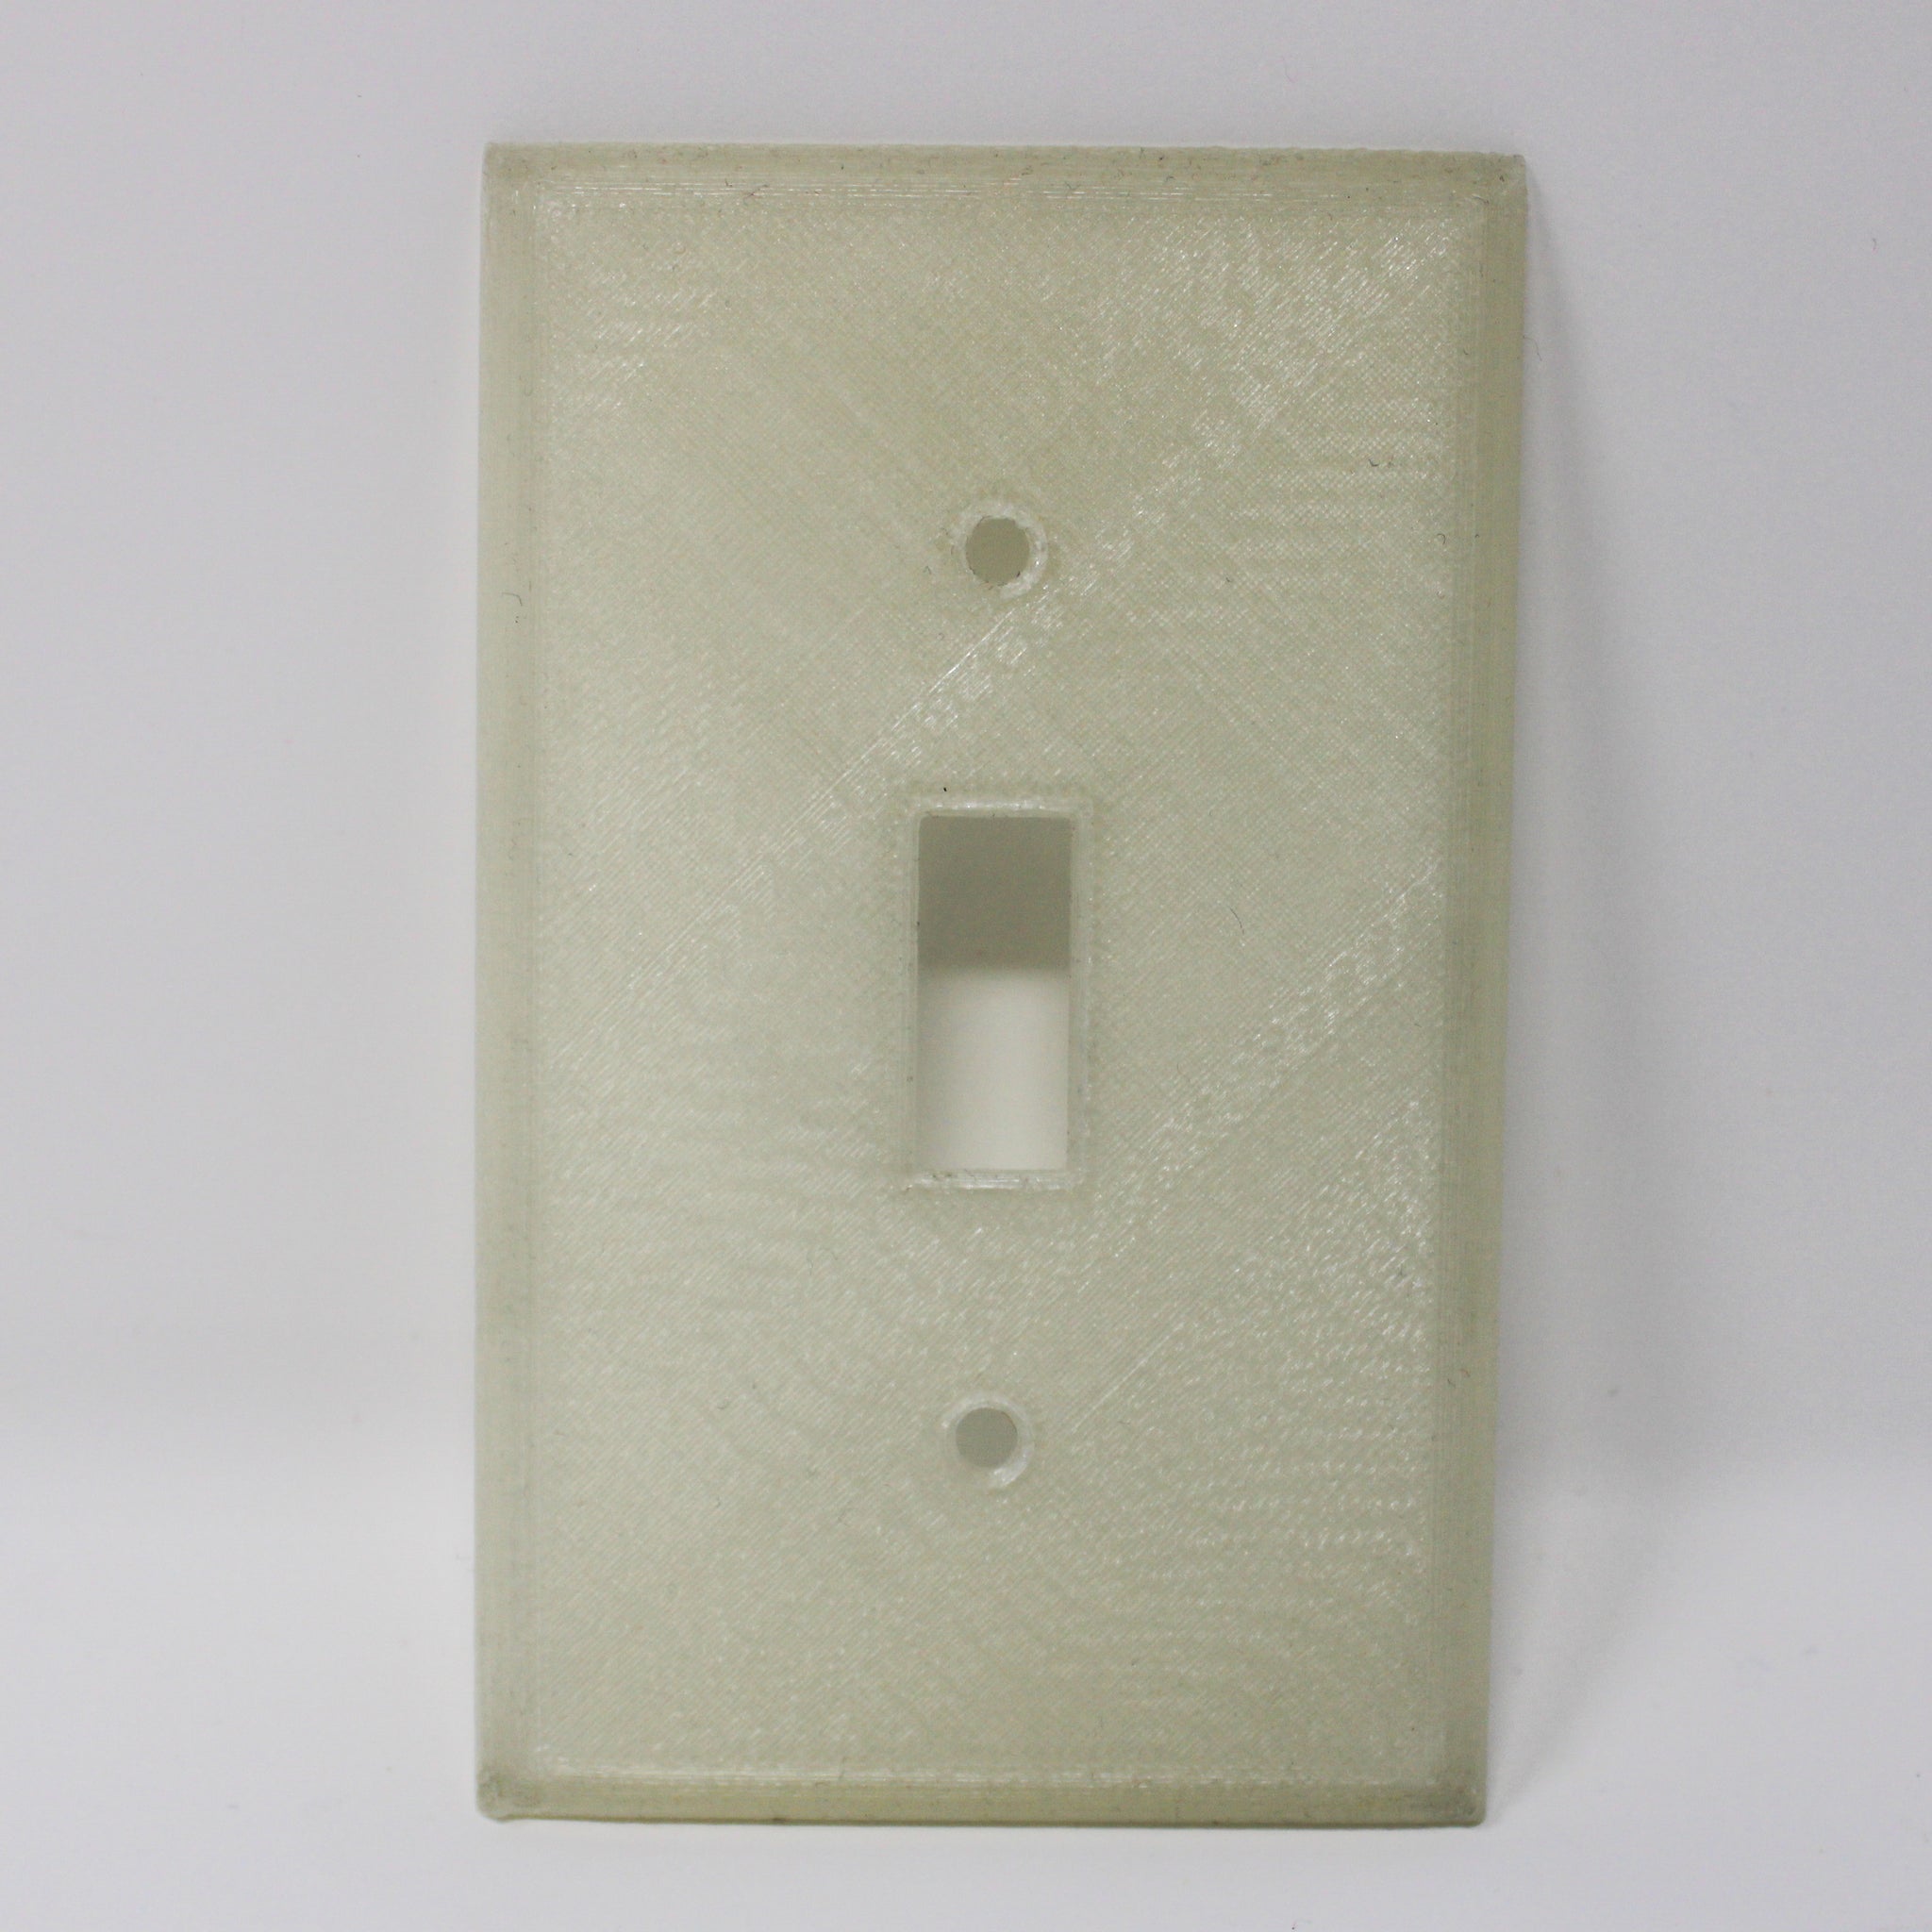 Glow in the dark light switch cover